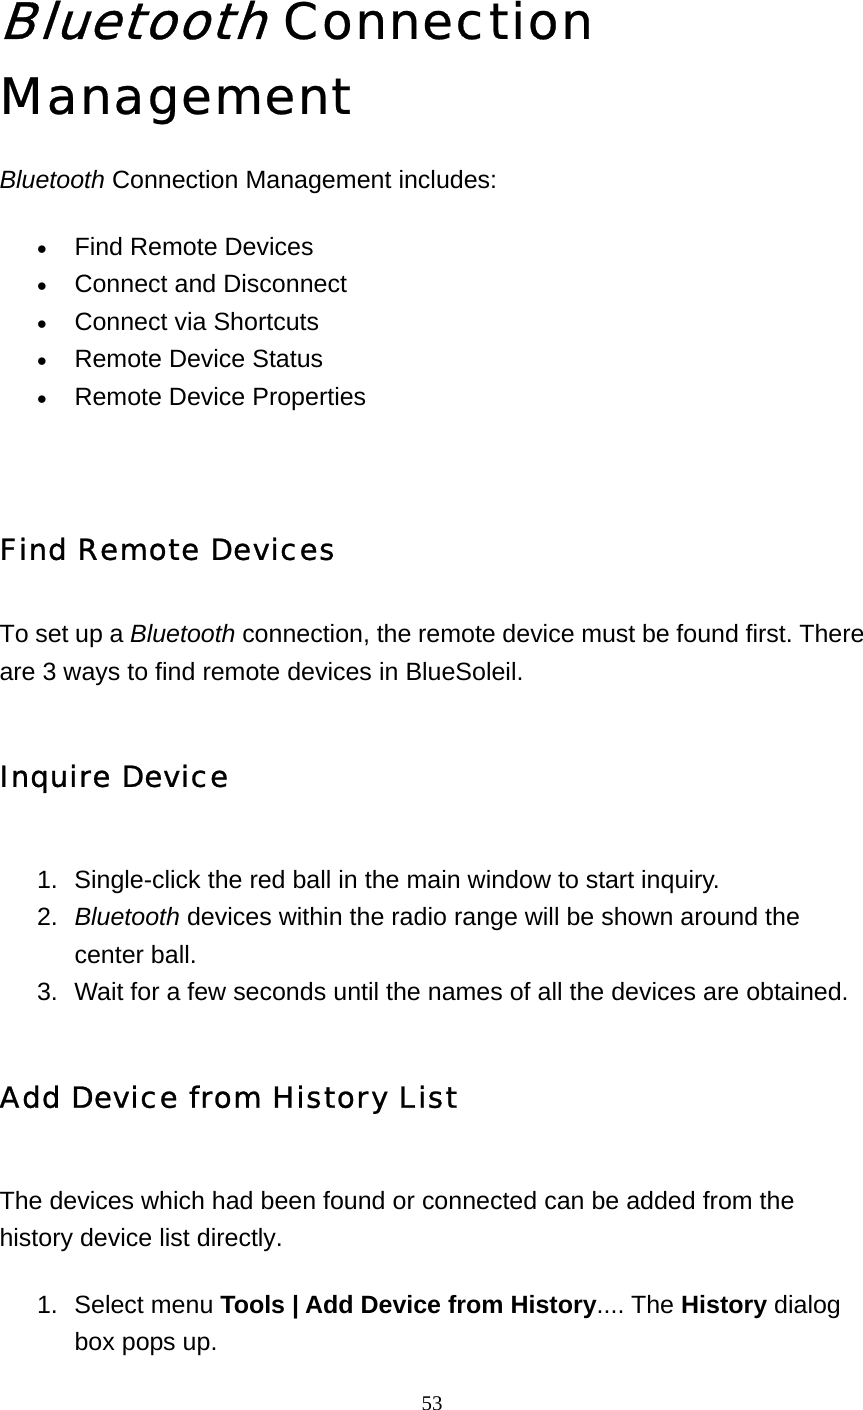   53 Bluetooth Connection Management Bluetooth Connection Management includes: • Find Remote Devices   • Connect and Disconnect   • Connect via Shortcuts   • Remote Device Status   • Remote Device Properties    Find Remote Devices To set up a Bluetooth connection, the remote device must be found first. There are 3 ways to find remote devices in BlueSoleil. Inquire Device 1.  Single-click the red ball in the main window to start inquiry.    2.  Bluetooth devices within the radio range will be shown around the center ball.    3.  Wait for a few seconds until the names of all the devices are obtained.   Add Device from History List The devices which had been found or connected can be added from the history device list directly. 1. Select menu Tools | Add Device from History.... The History dialog box pops up.    